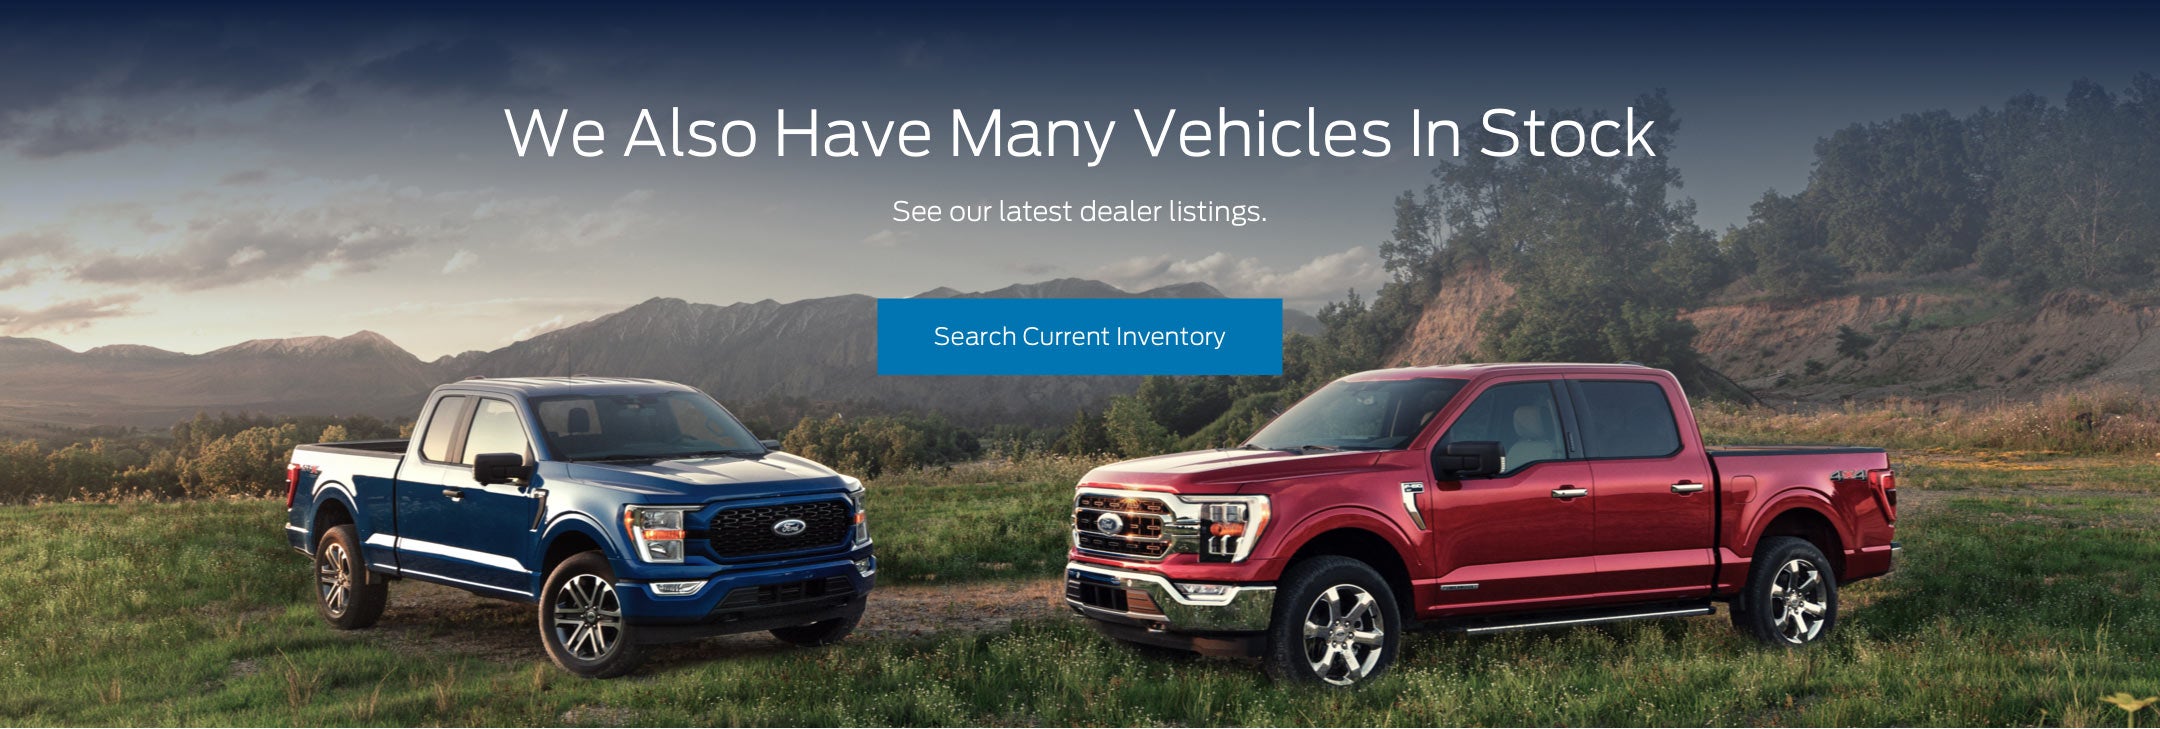 Ford vehicles in stock | Maguire Ford in Ithaca NY